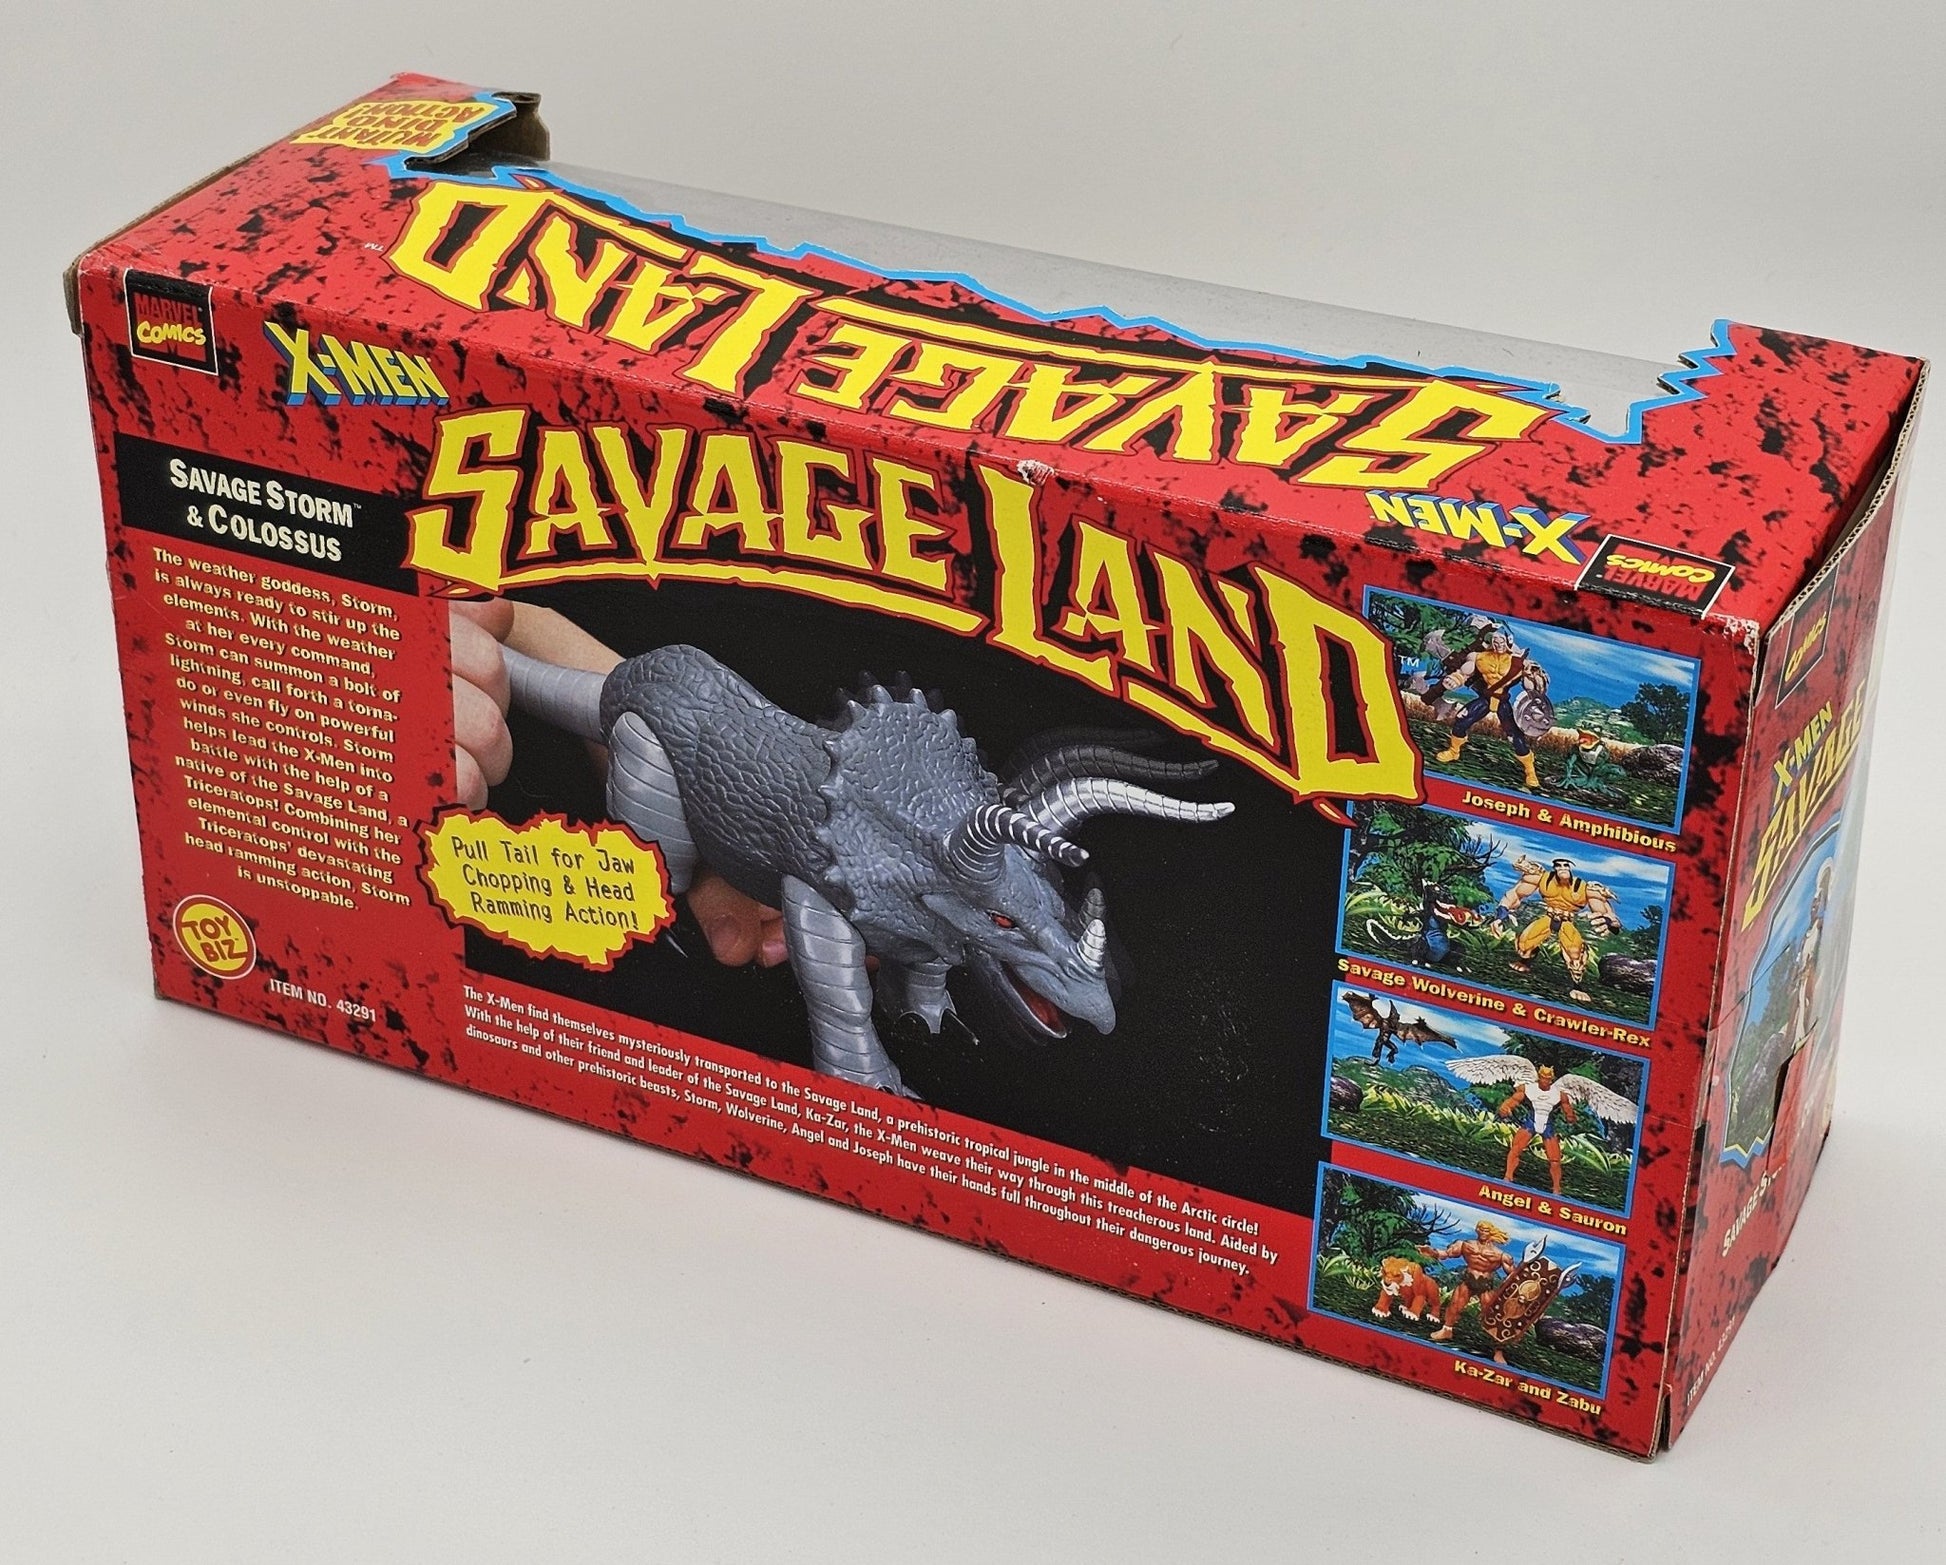 Toy Biz - Toy Biz | X-Men Savage Land - Savage Storm & Colossus Mutant Dino with Head Ramming Action - Action Figures - Steady Bunny Shop